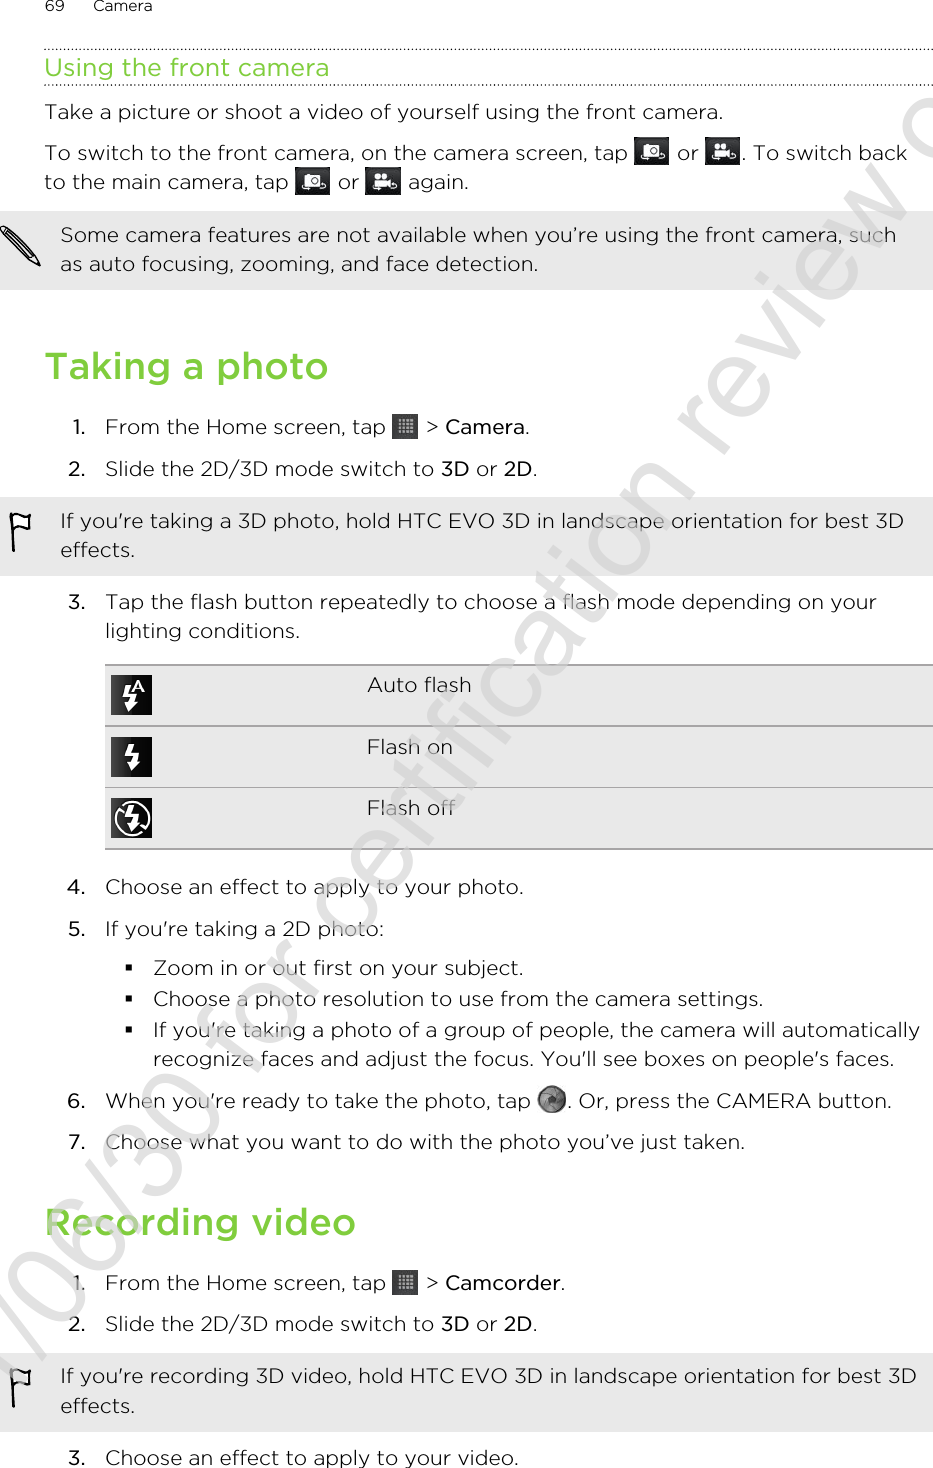 Using the front cameraTake a picture or shoot a video of yourself using the front camera.To switch to the front camera, on the camera screen, tap   or  . To switch backto the main camera, tap   or   again.Some camera features are not available when you’re using the front camera, suchas auto focusing, zooming, and face detection.Taking a photo1. From the Home screen, tap   &gt; Camera.2. Slide the 2D/3D mode switch to 3D or 2D. If you&apos;re taking a 3D photo, hold HTC EVO 3D in landscape orientation for best 3Deffects.3. Tap the flash button repeatedly to choose a flash mode depending on yourlighting conditions.Auto flashFlash onFlash off4. Choose an effect to apply to your photo.5. If you&apos;re taking a 2D photo:§Zoom in or out first on your subject.§Choose a photo resolution to use from the camera settings.§If you&apos;re taking a photo of a group of people, the camera will automaticallyrecognize faces and adjust the focus. You&apos;ll see boxes on people&apos;s faces.6. When you&apos;re ready to take the photo, tap  . Or, press the CAMERA button.7. Choose what you want to do with the photo you’ve just taken.Recording video1. From the Home screen, tap   &gt; Camcorder.2. Slide the 2D/3D mode switch to 3D or 2D. If you&apos;re recording 3D video, hold HTC EVO 3D in landscape orientation for best 3Deffects.3. Choose an effect to apply to your video.69 Camera2011/06/30 for certification review only